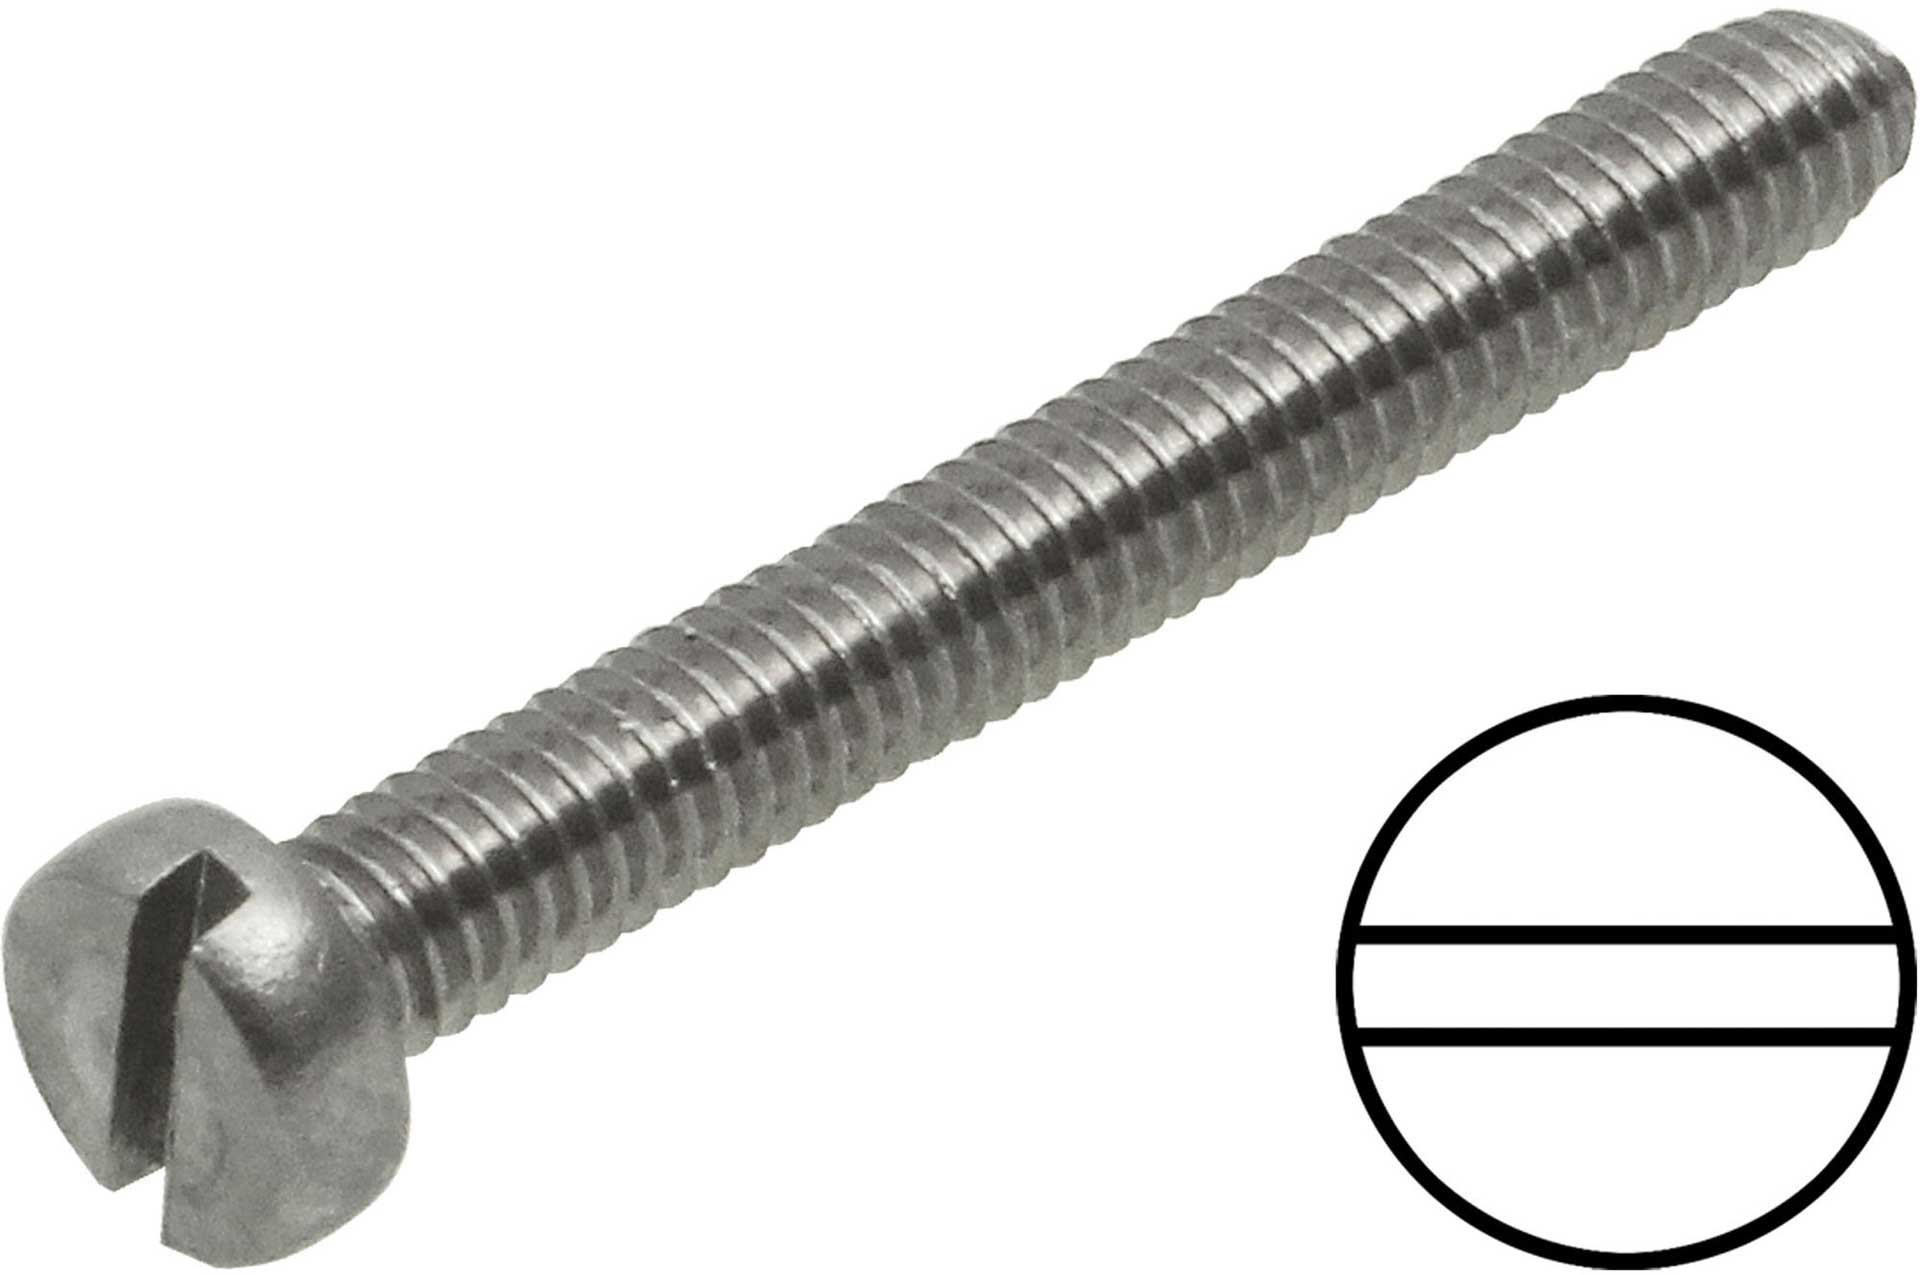 Modellbau Lindinger CHEESE-HEAD BOLTS M2/10MM STAINLESS STEEL, 10PCS.